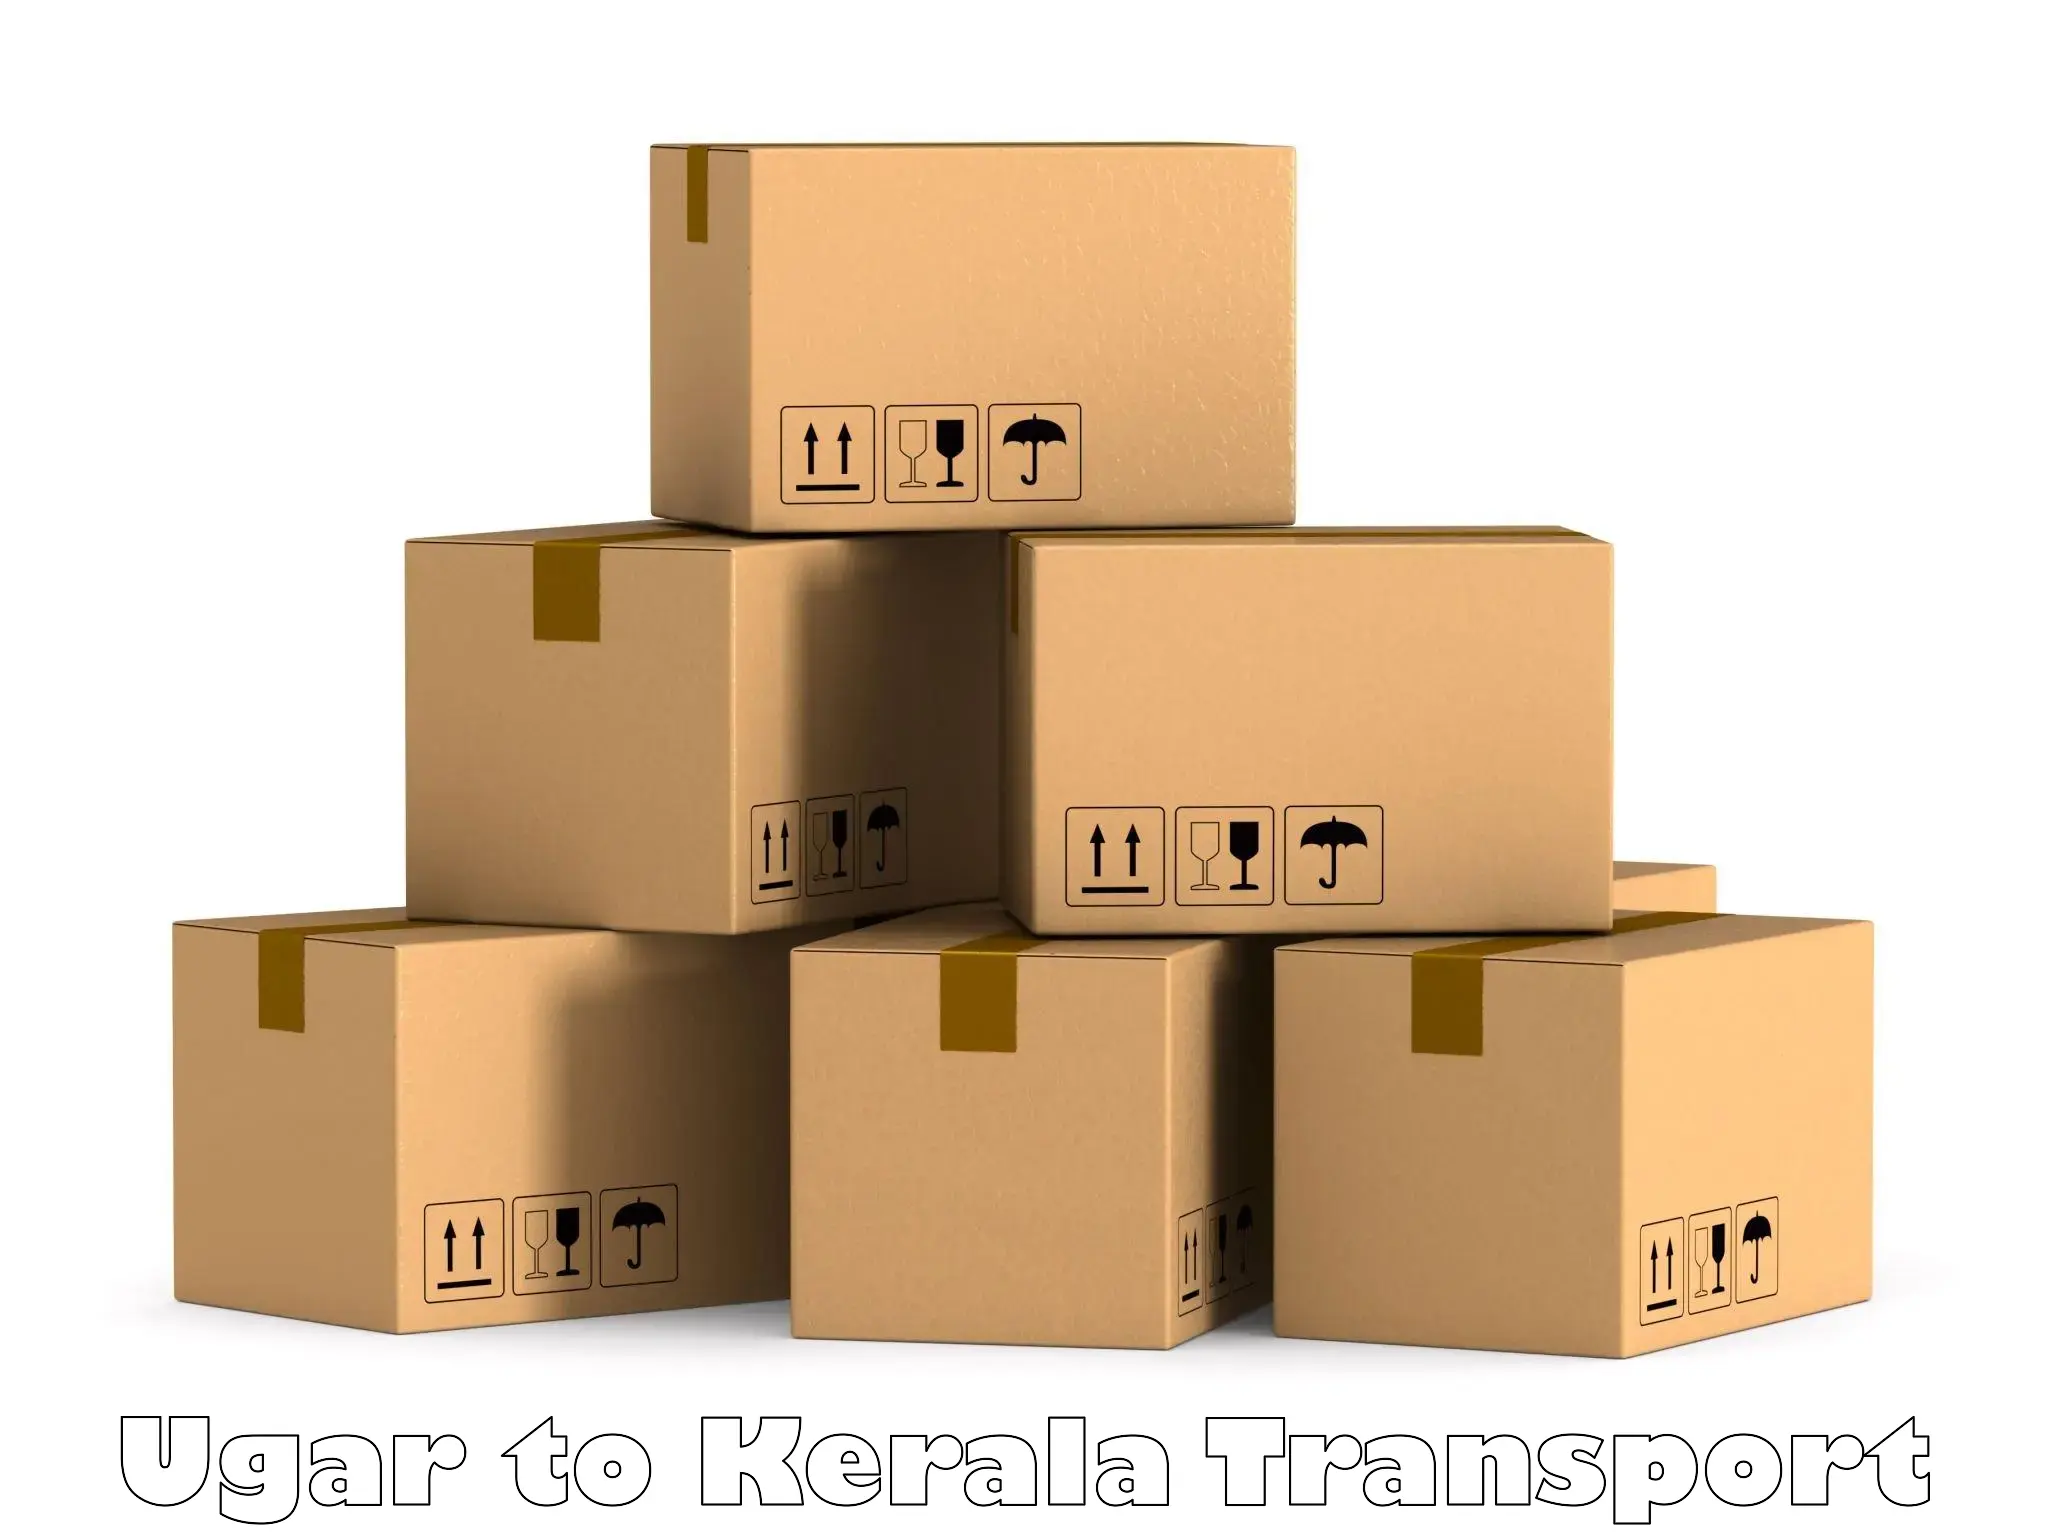 Container transportation services Ugar to Ernakulam